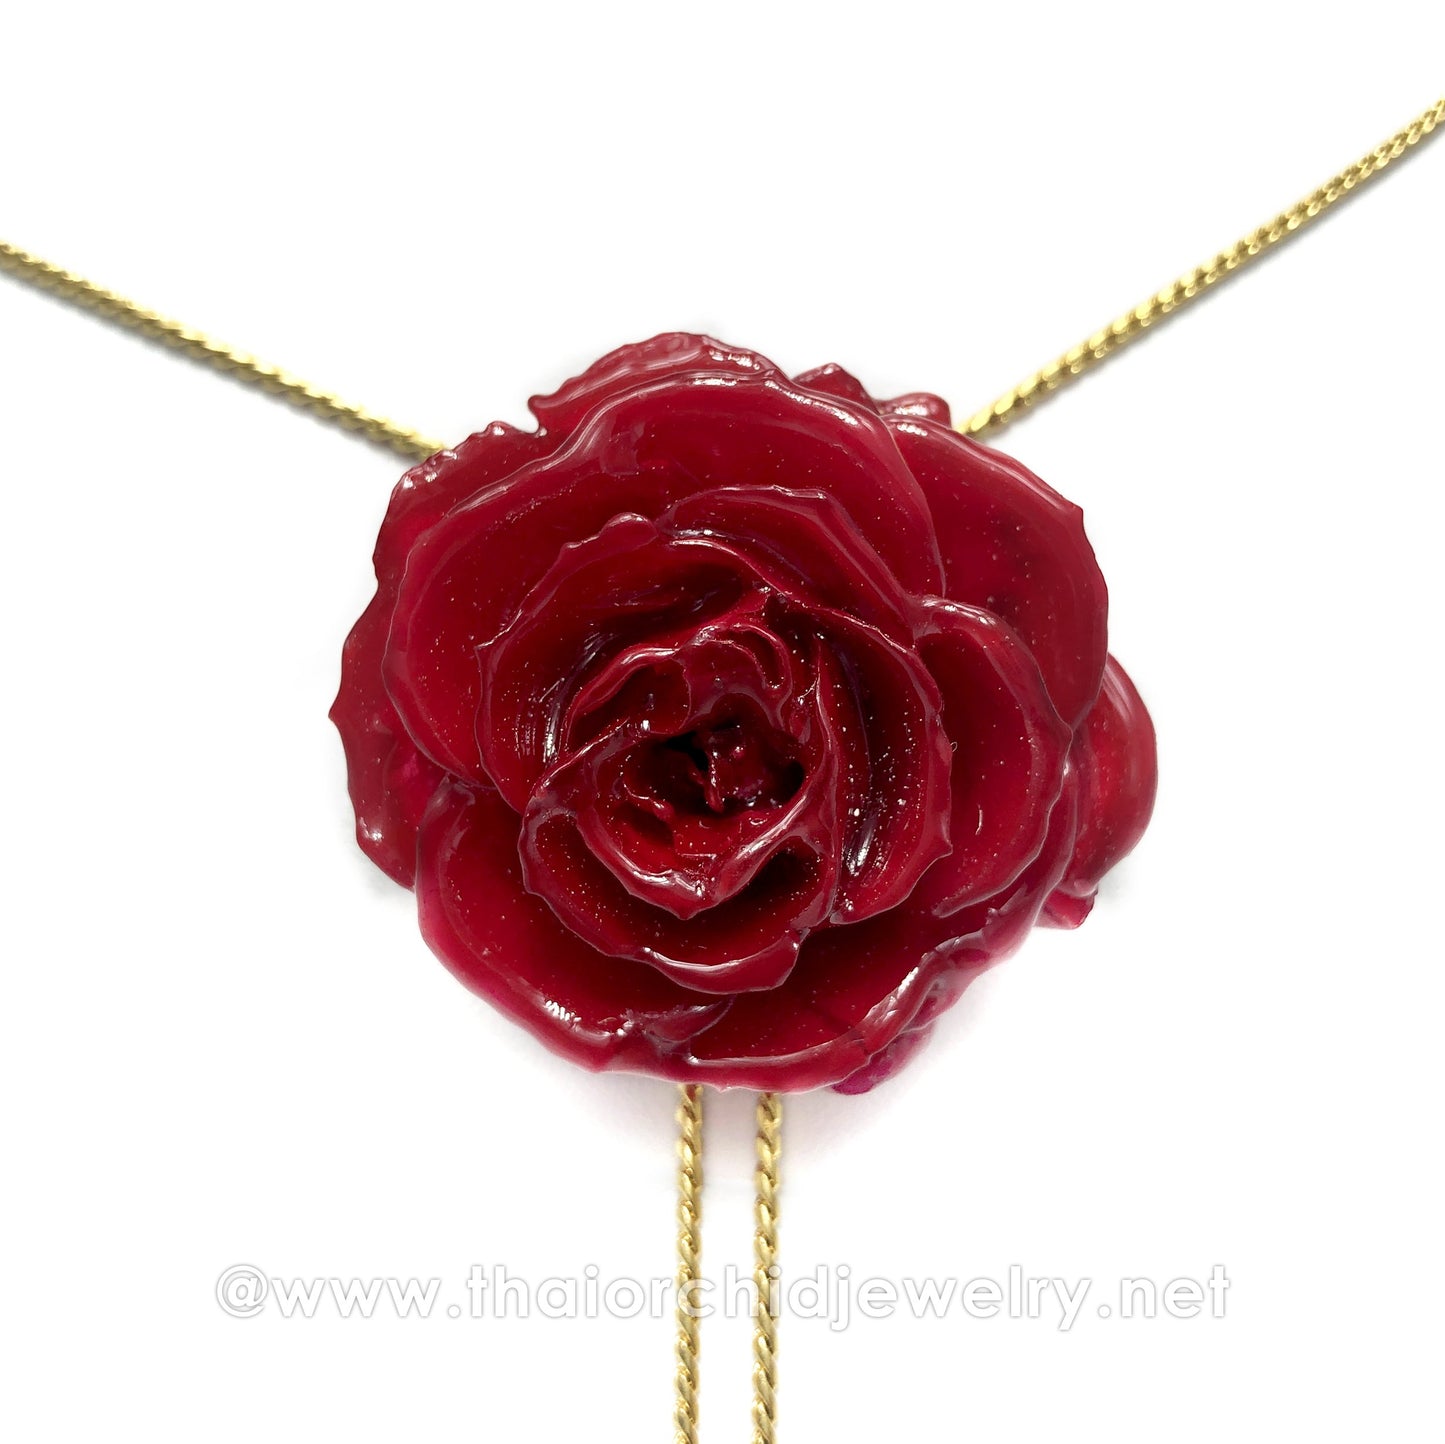 Mini Rose Mini 1.5-2.25 inch Pendant Necklace 18 inch Gold Plated 24K (Red)